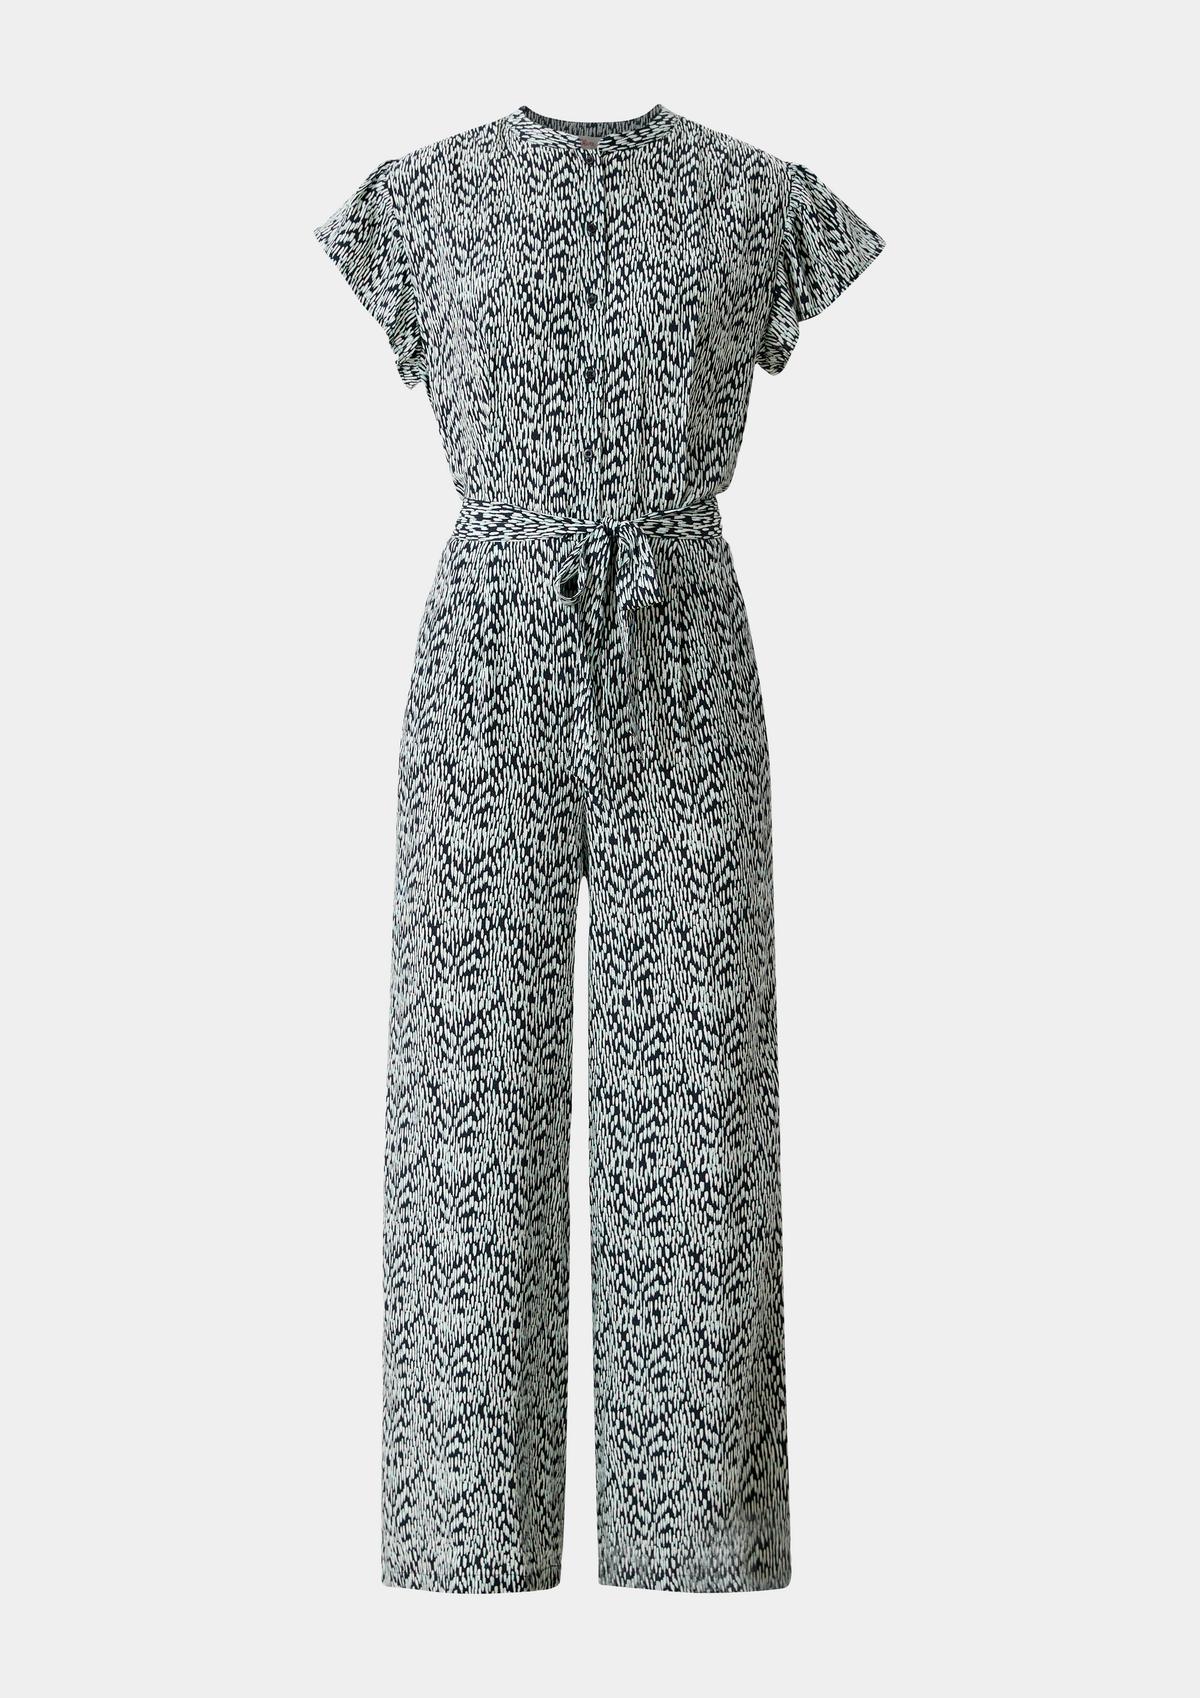 s.Oliver Jumpsuit mit Allover-Muster